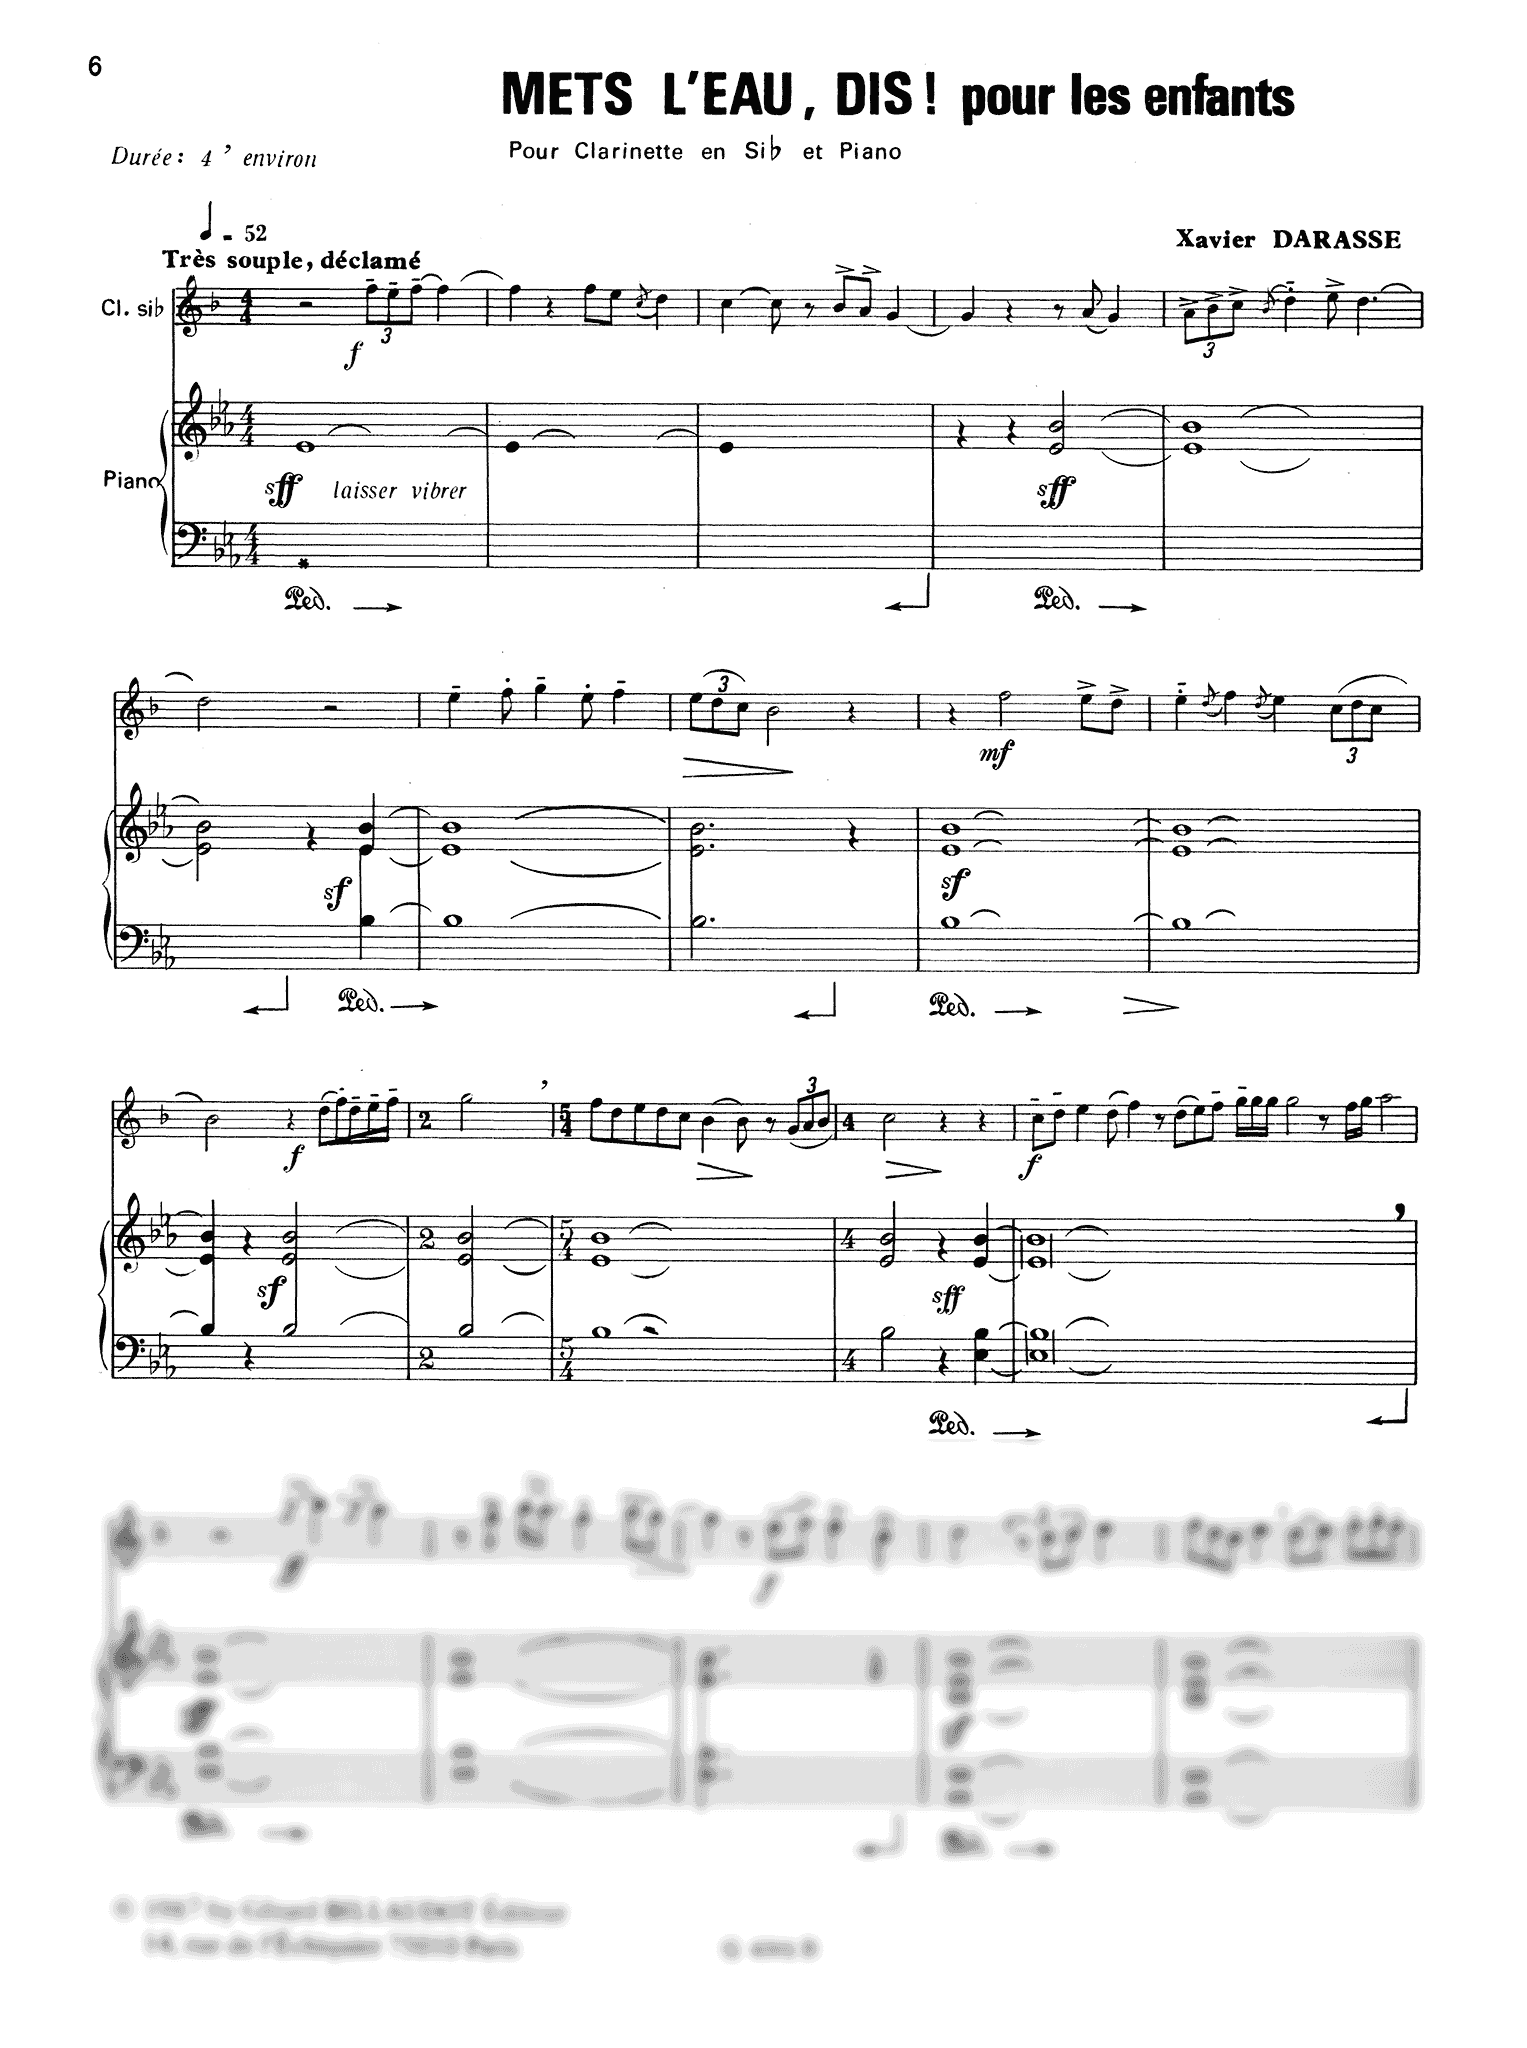 Darasse Mets l'eau, dis! clarinet and piano score